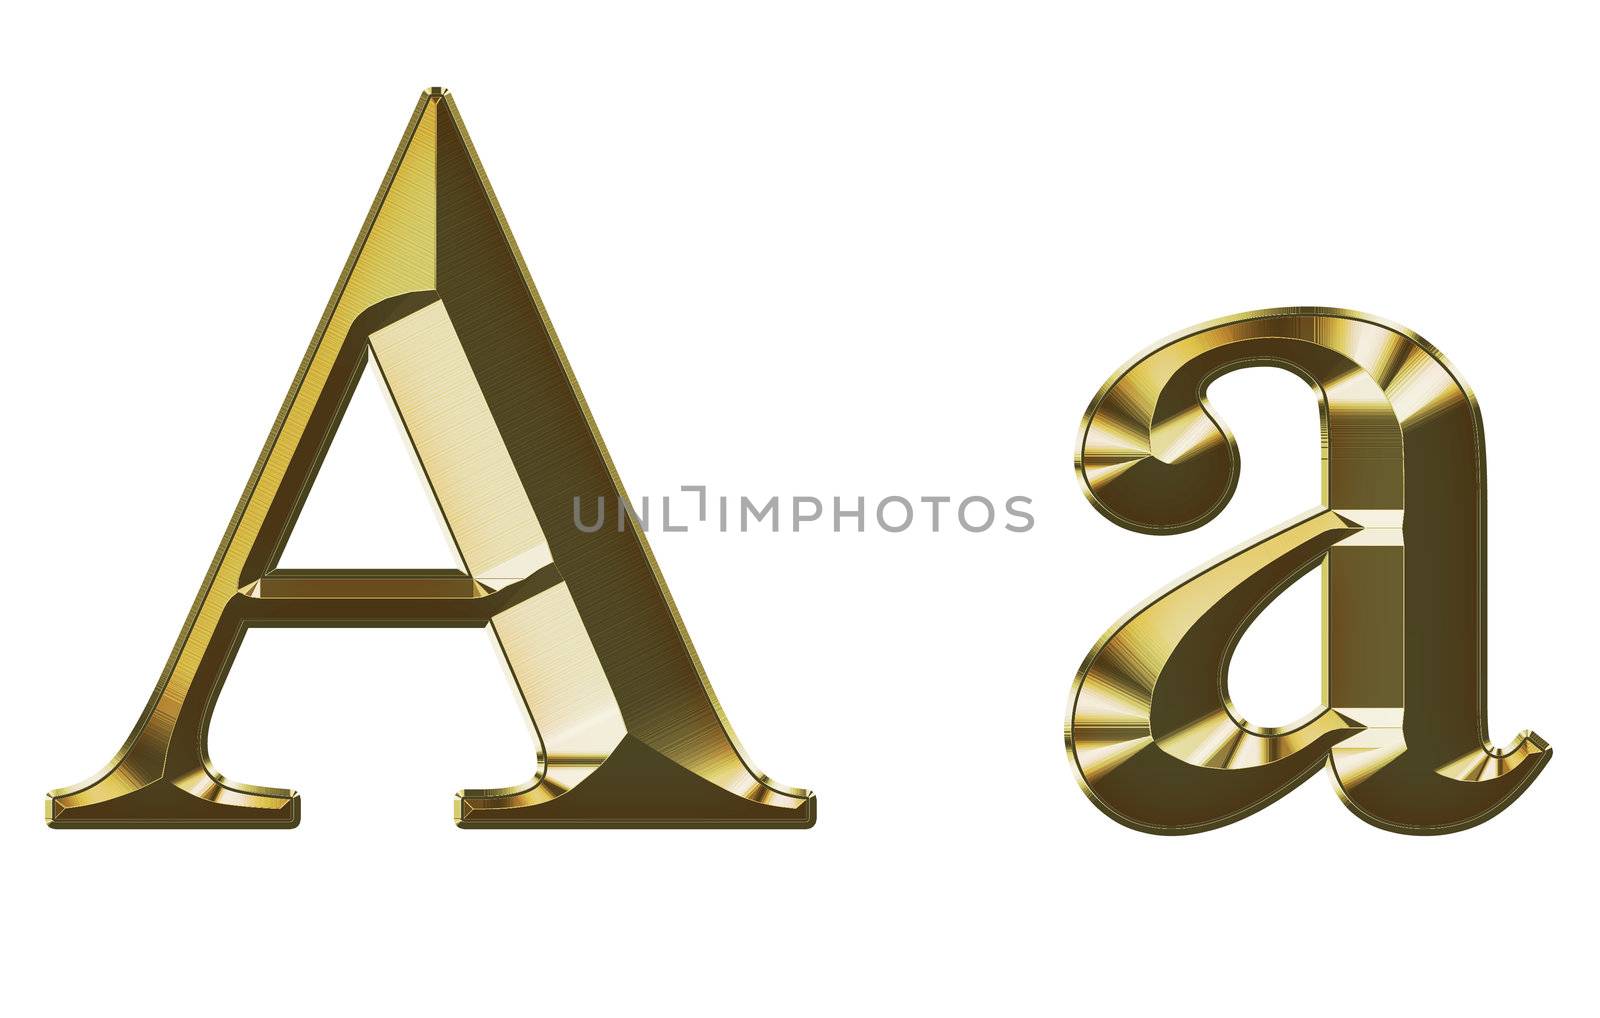 Exclusive collection font from brushed gold on white background